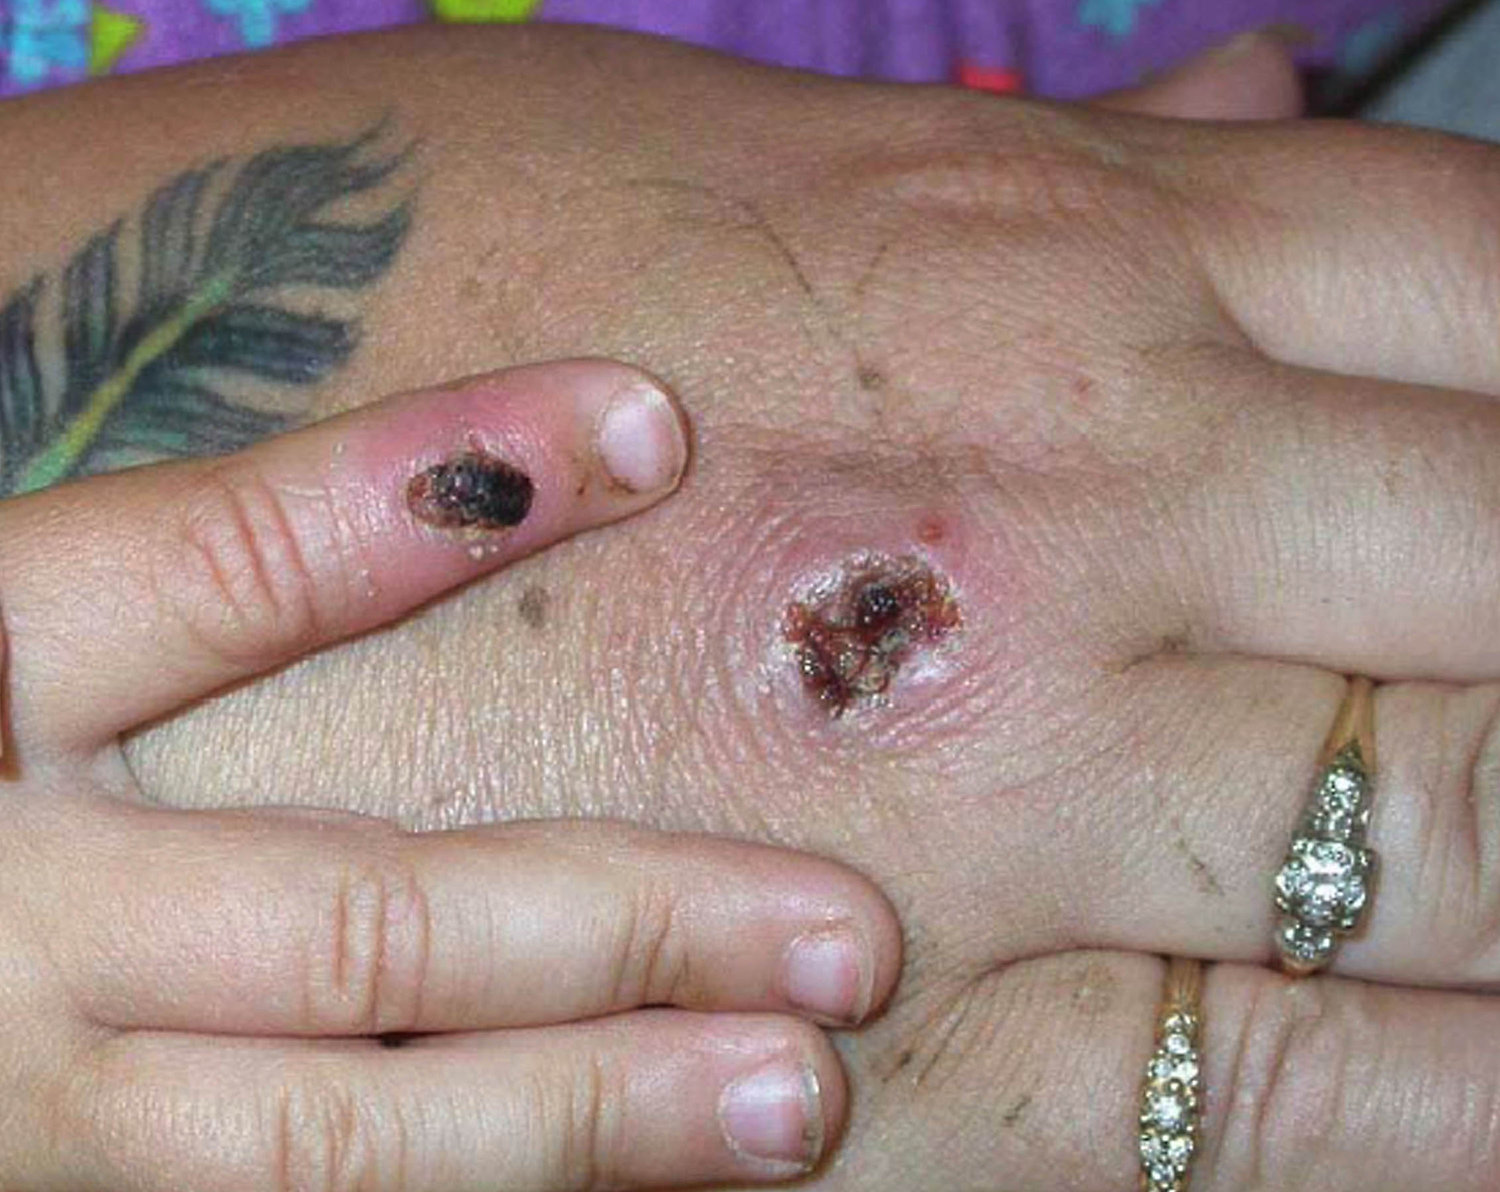 In this Centers for Disease Control and Prevention handout graphic, symptoms of one of the first known cases of the monkeypox virus are shown on a patient's hand on June 5, 2003.